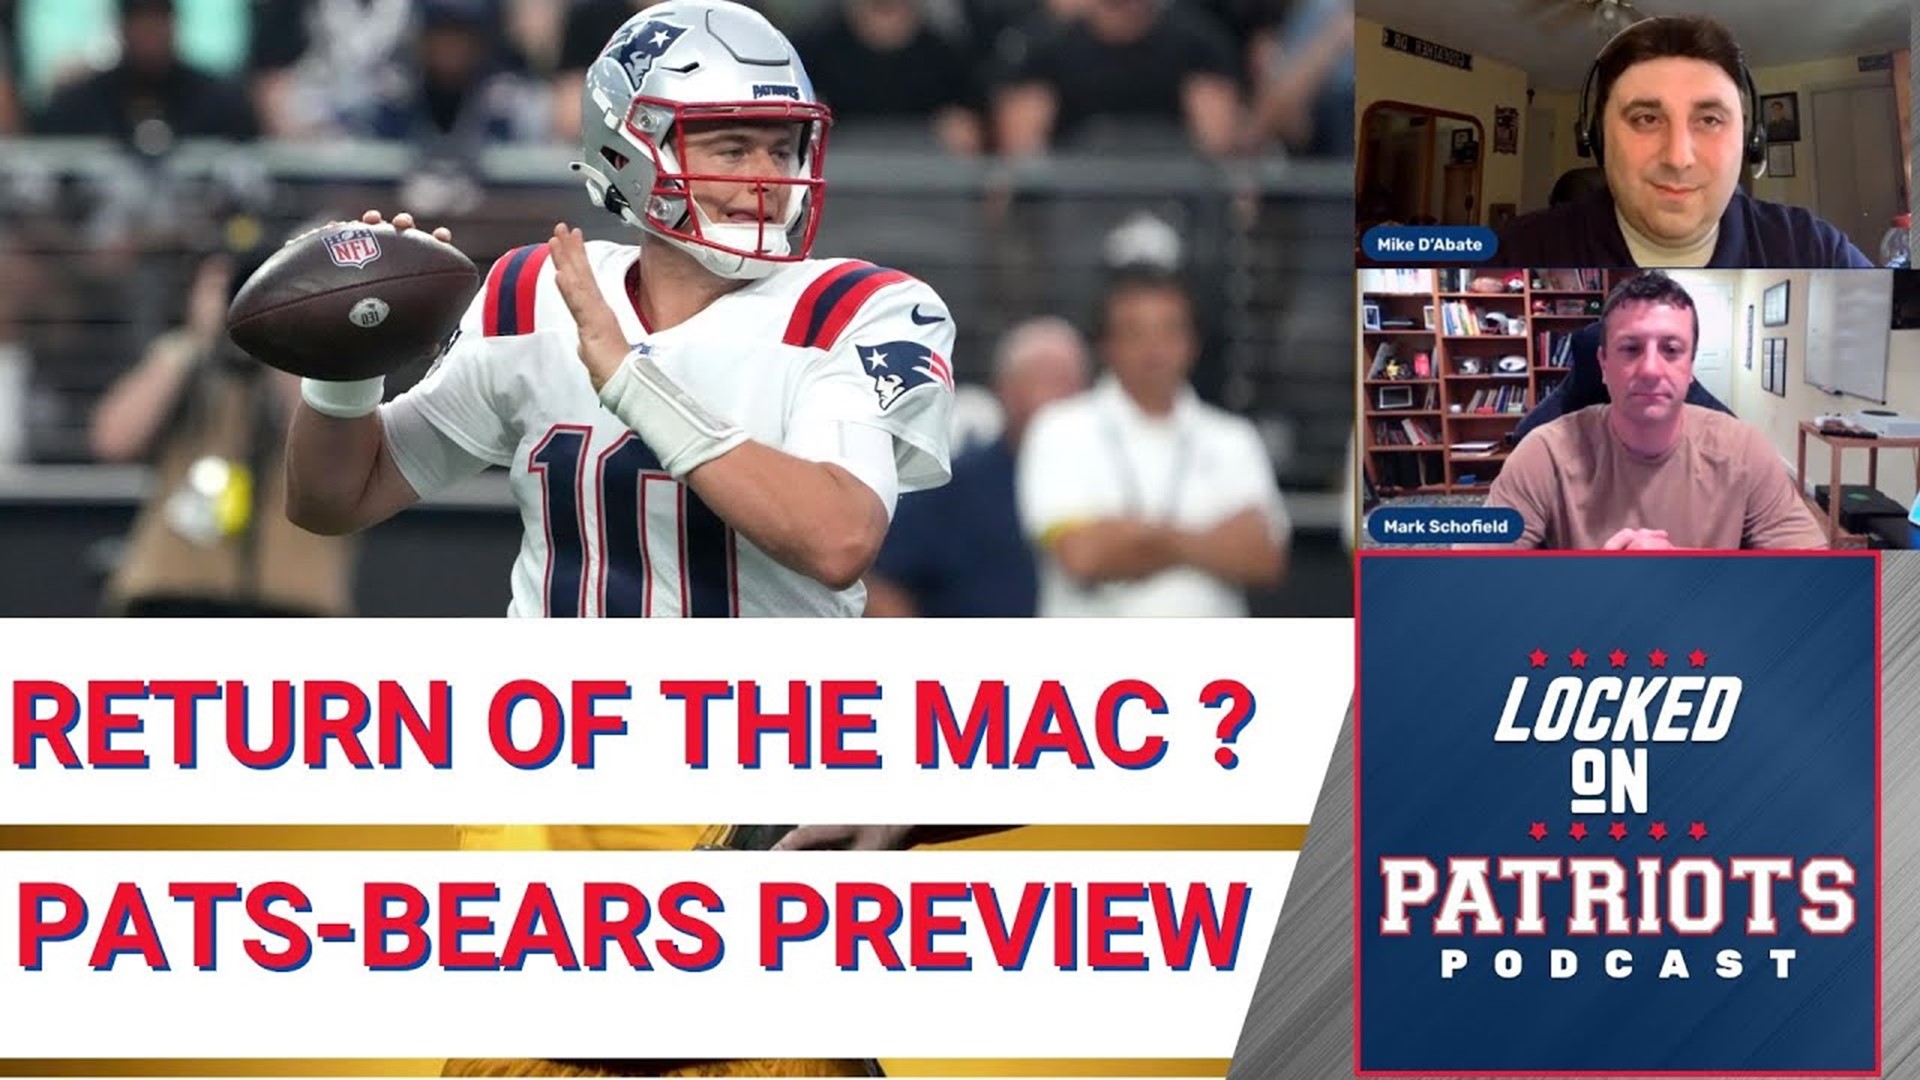 As the New England Patriots prepare to take on the Chicago Bears on Monday night, fans and media alike are wondering which quarterback will be starting under center.